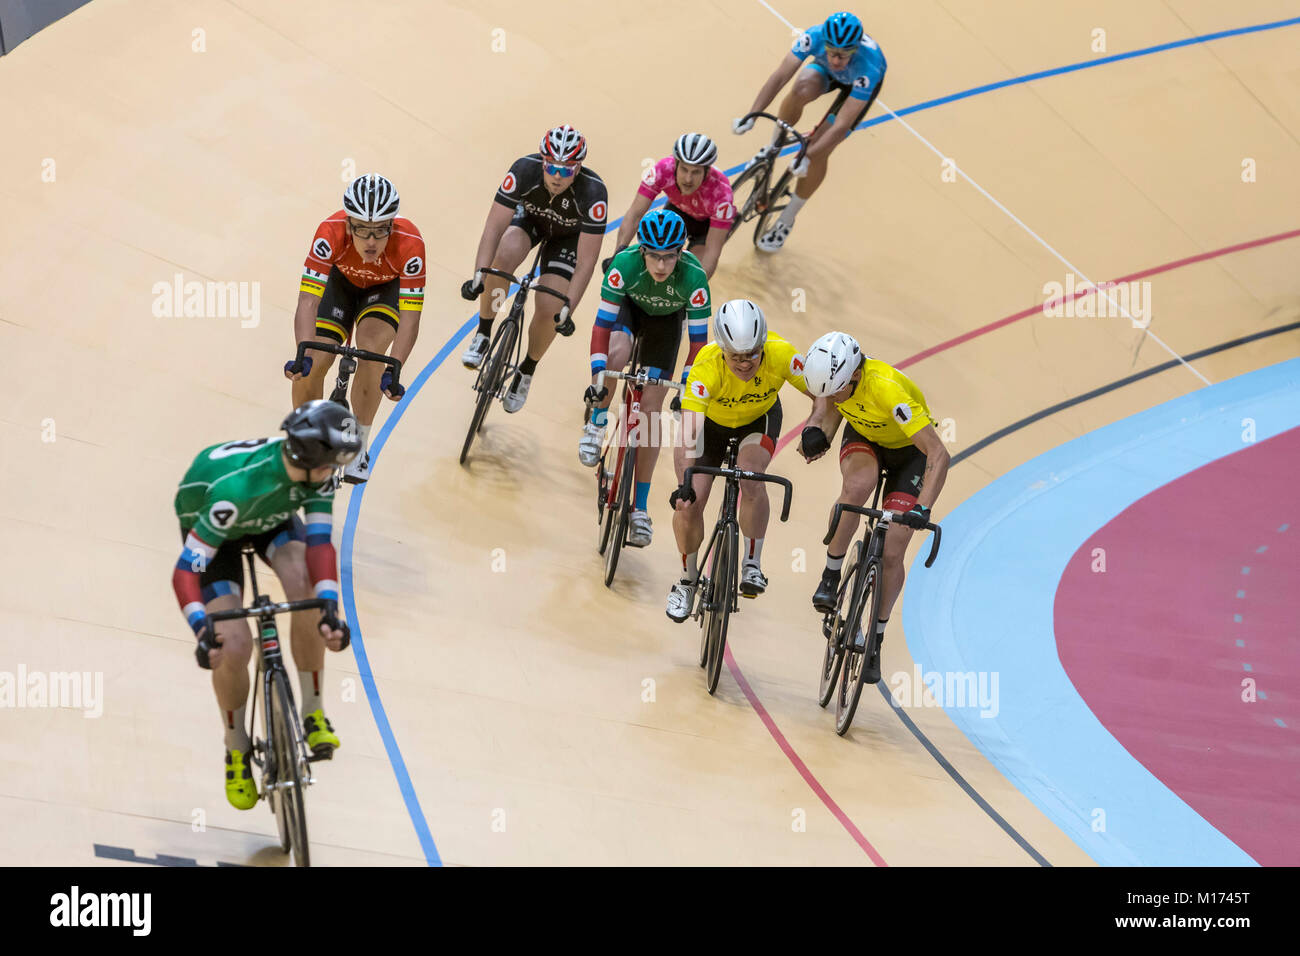 Detroit, Michigan USA - 26 January 2018 - A series of bicycle races celebrated the grand opening of the Lexus Velodrome, one of only three indoor veleromes in the United States. Teammates in yellow jerseys exchange places in a 'Madison' relay race. Credit: Jim West/Alamy Live News Stock Photo